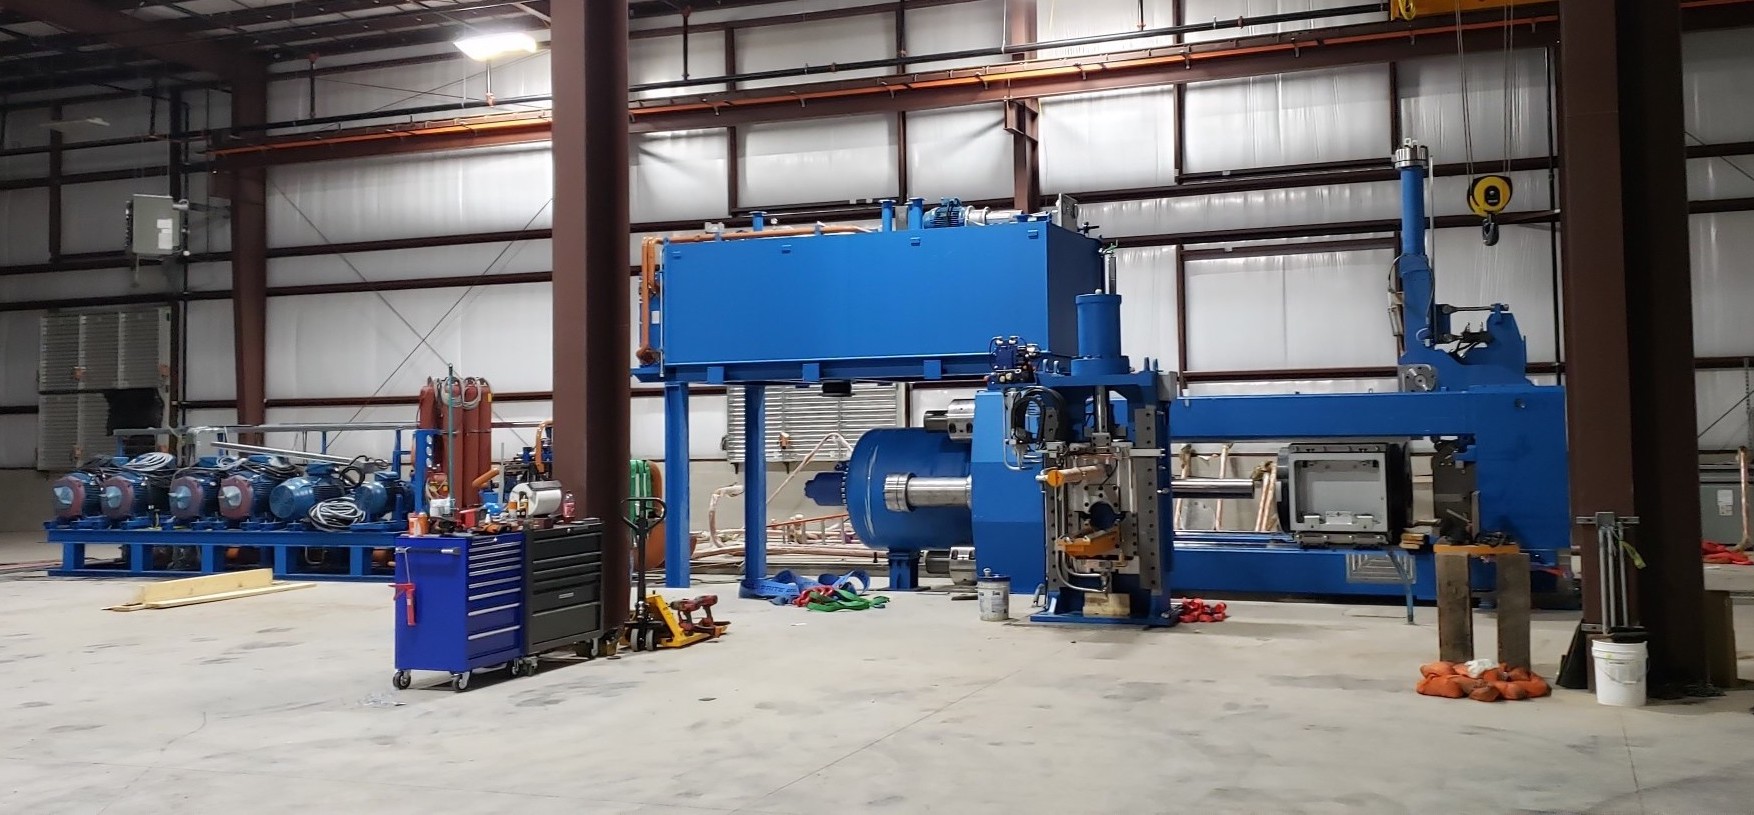 Figure 2. The new 9 inch, 3,000 ton press during installation.